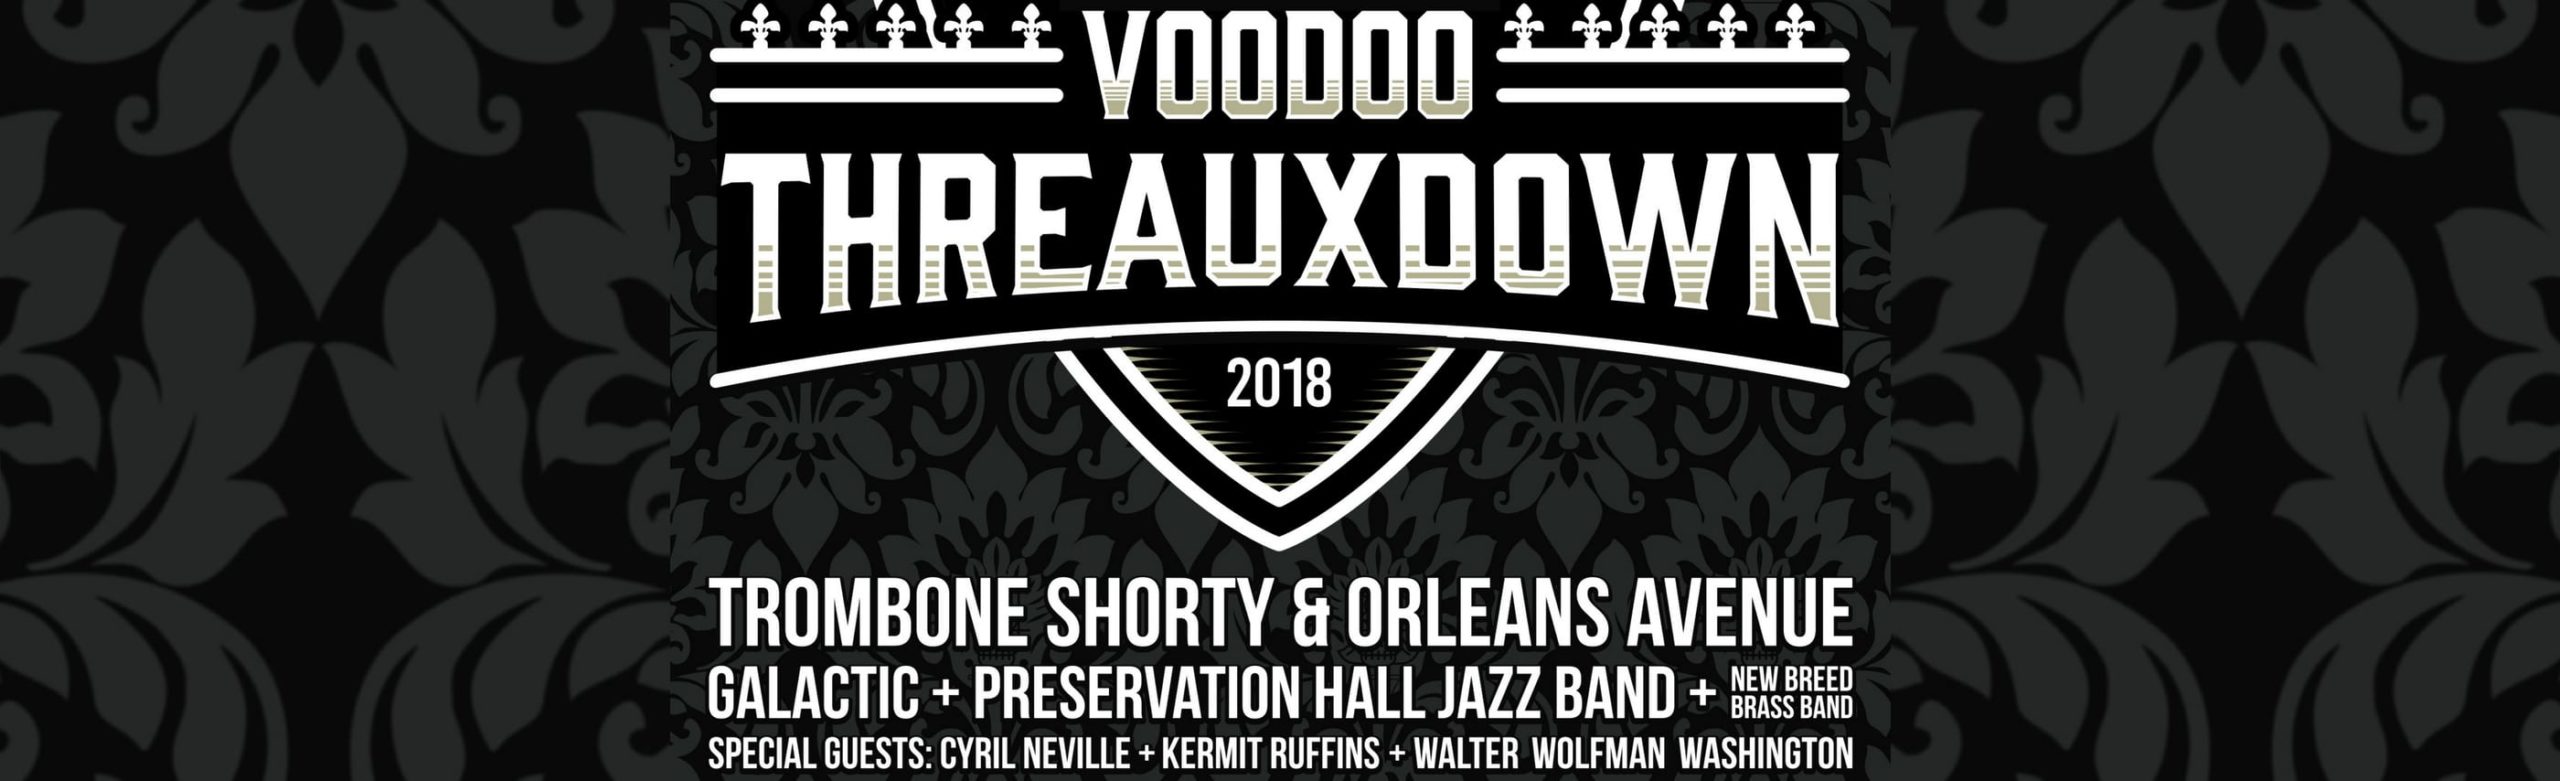 New Orleans Brings All-Star Lineup to KettleHouse Amphitheater Image